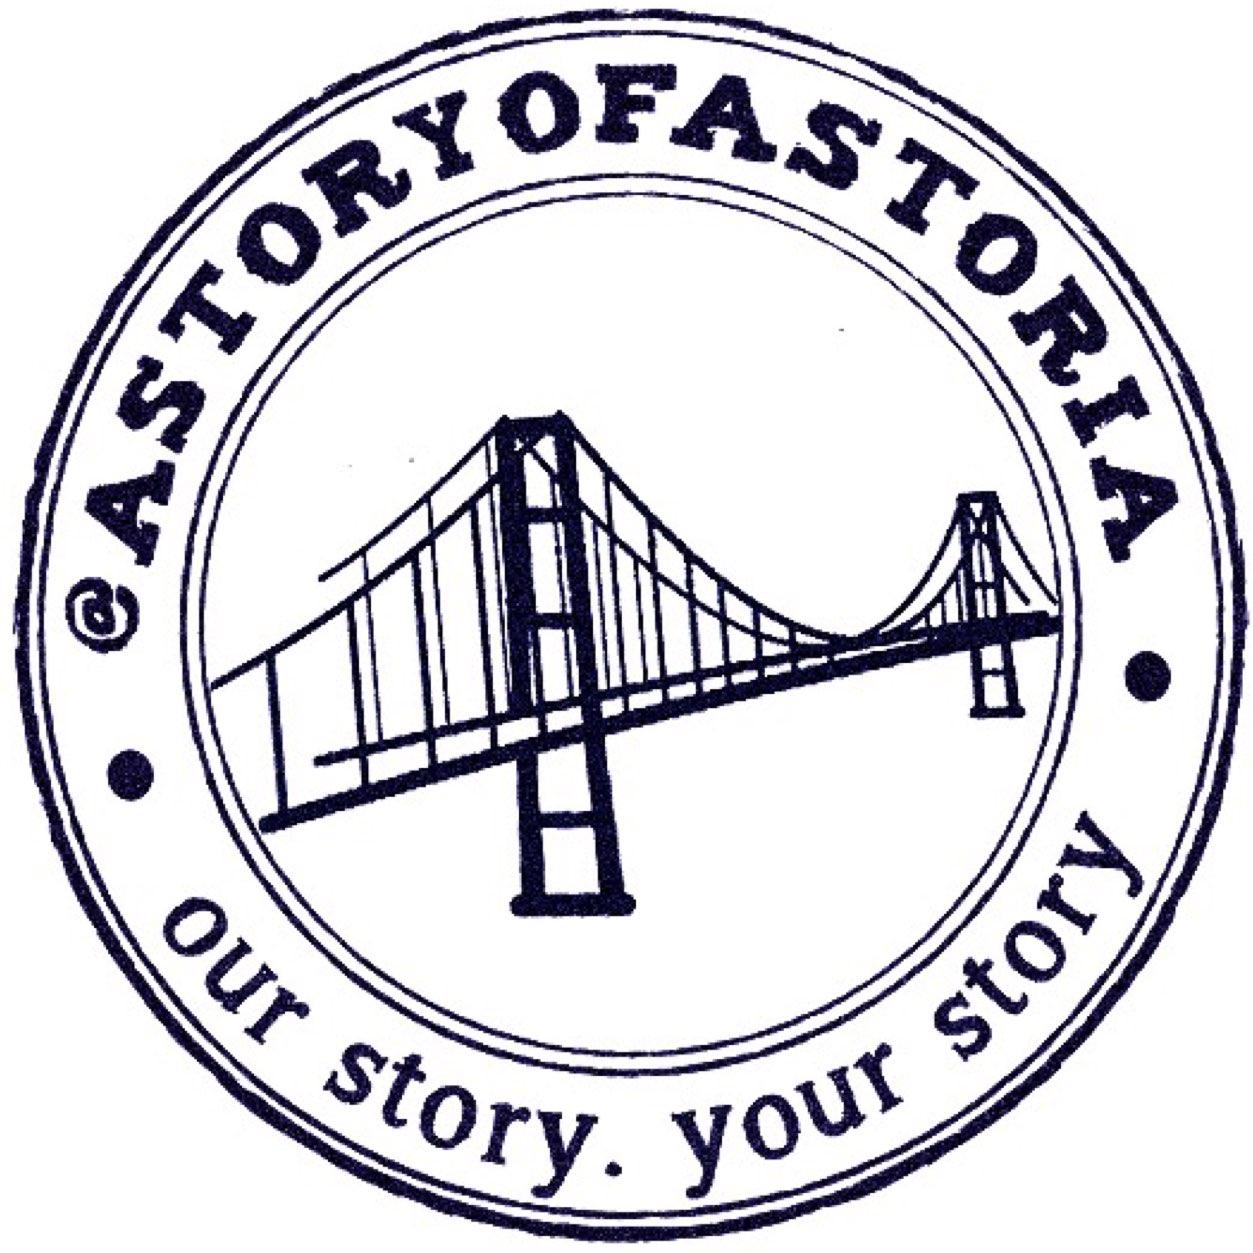 our story. your story. astoria.